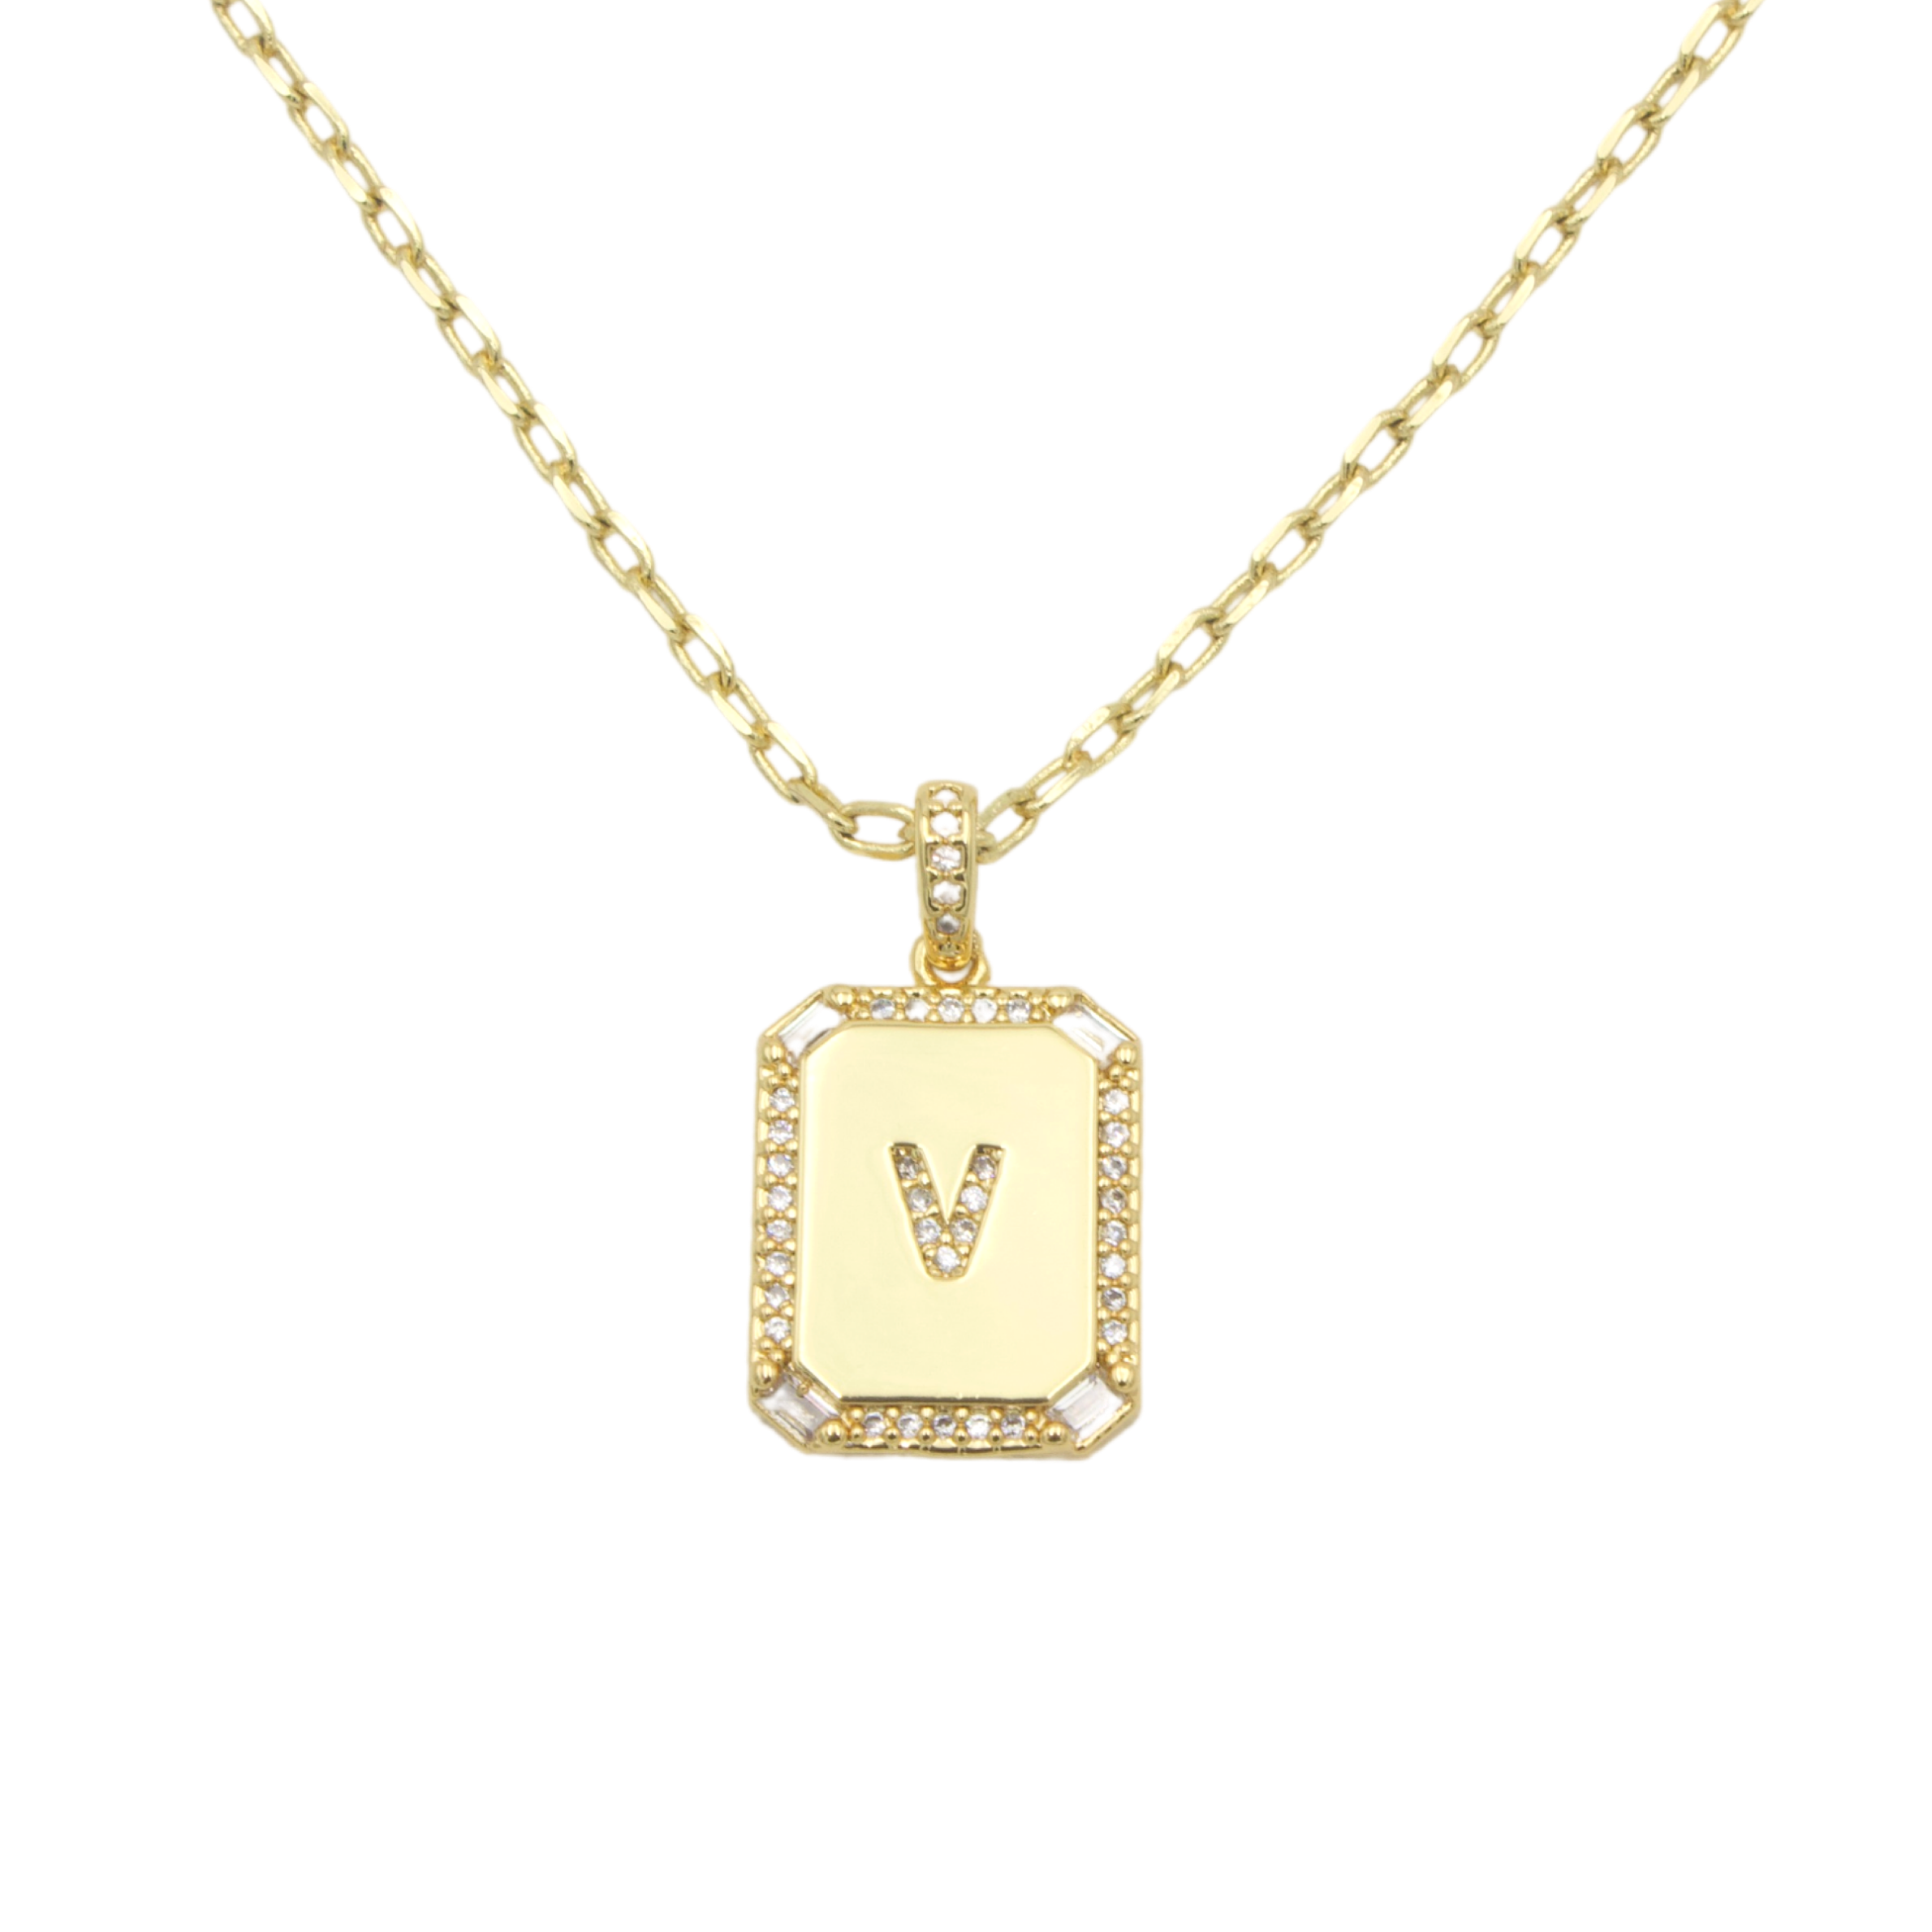 AW Boutique's gold filled 16 inch cable chain necklace finished with a dainty initial pendant with cubic zirconia detail. V initial shown.